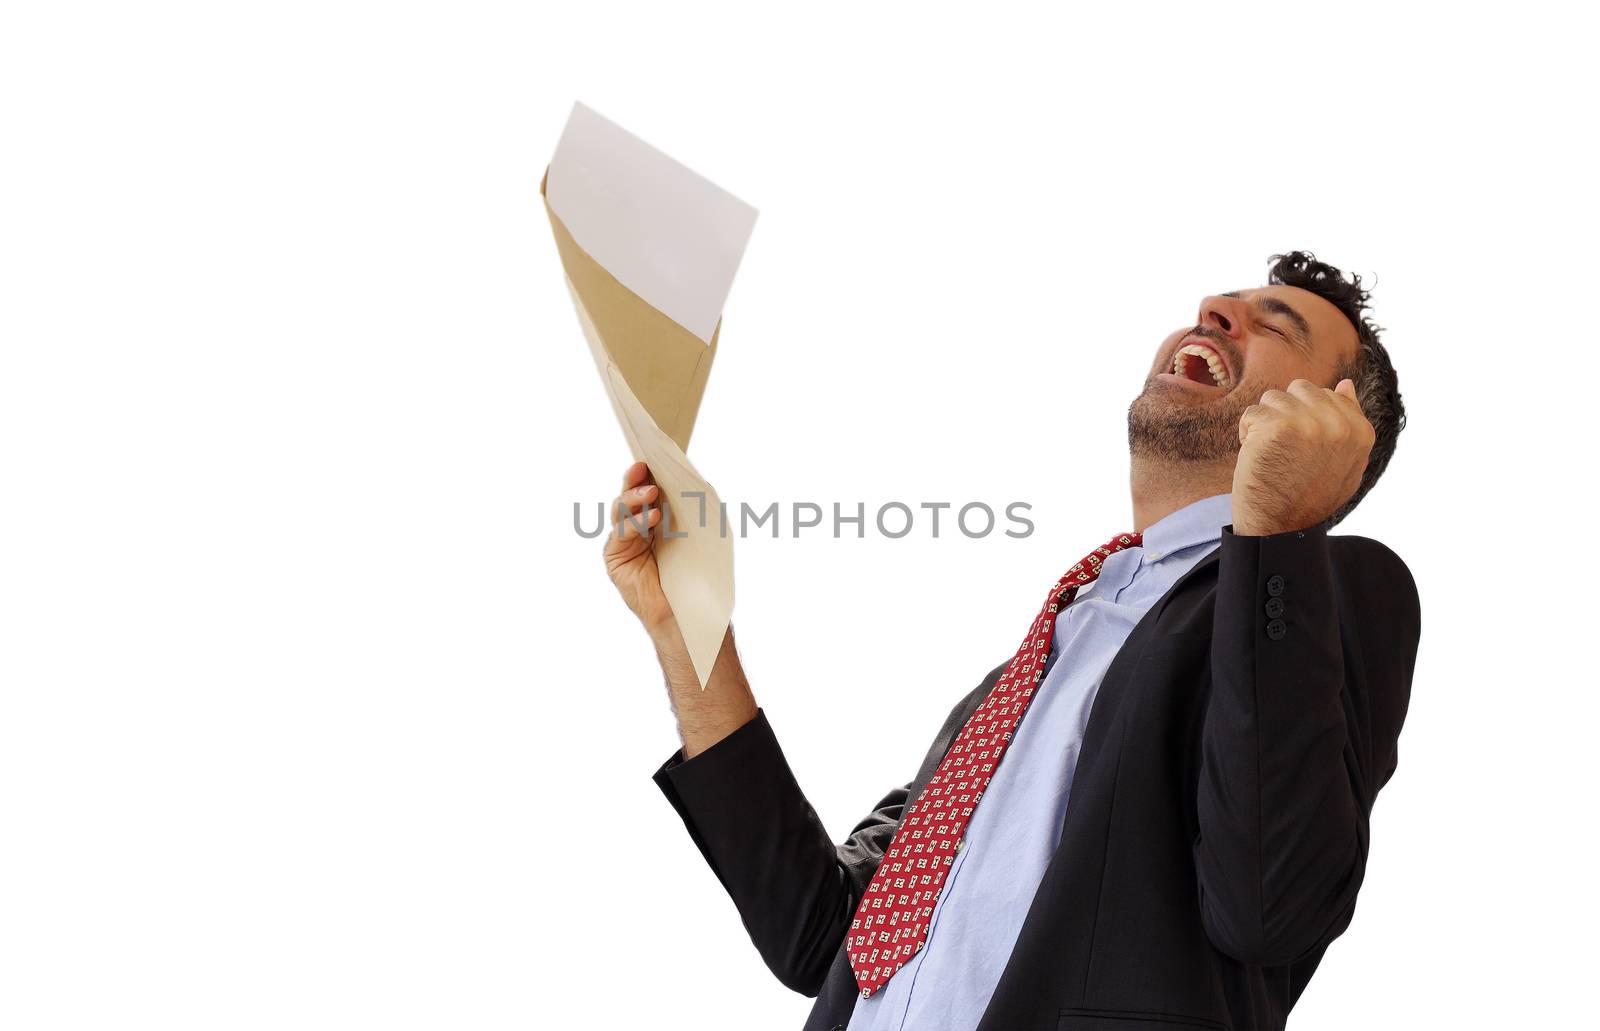 Man reacting with jubilation to a letter by HD_premium_shots